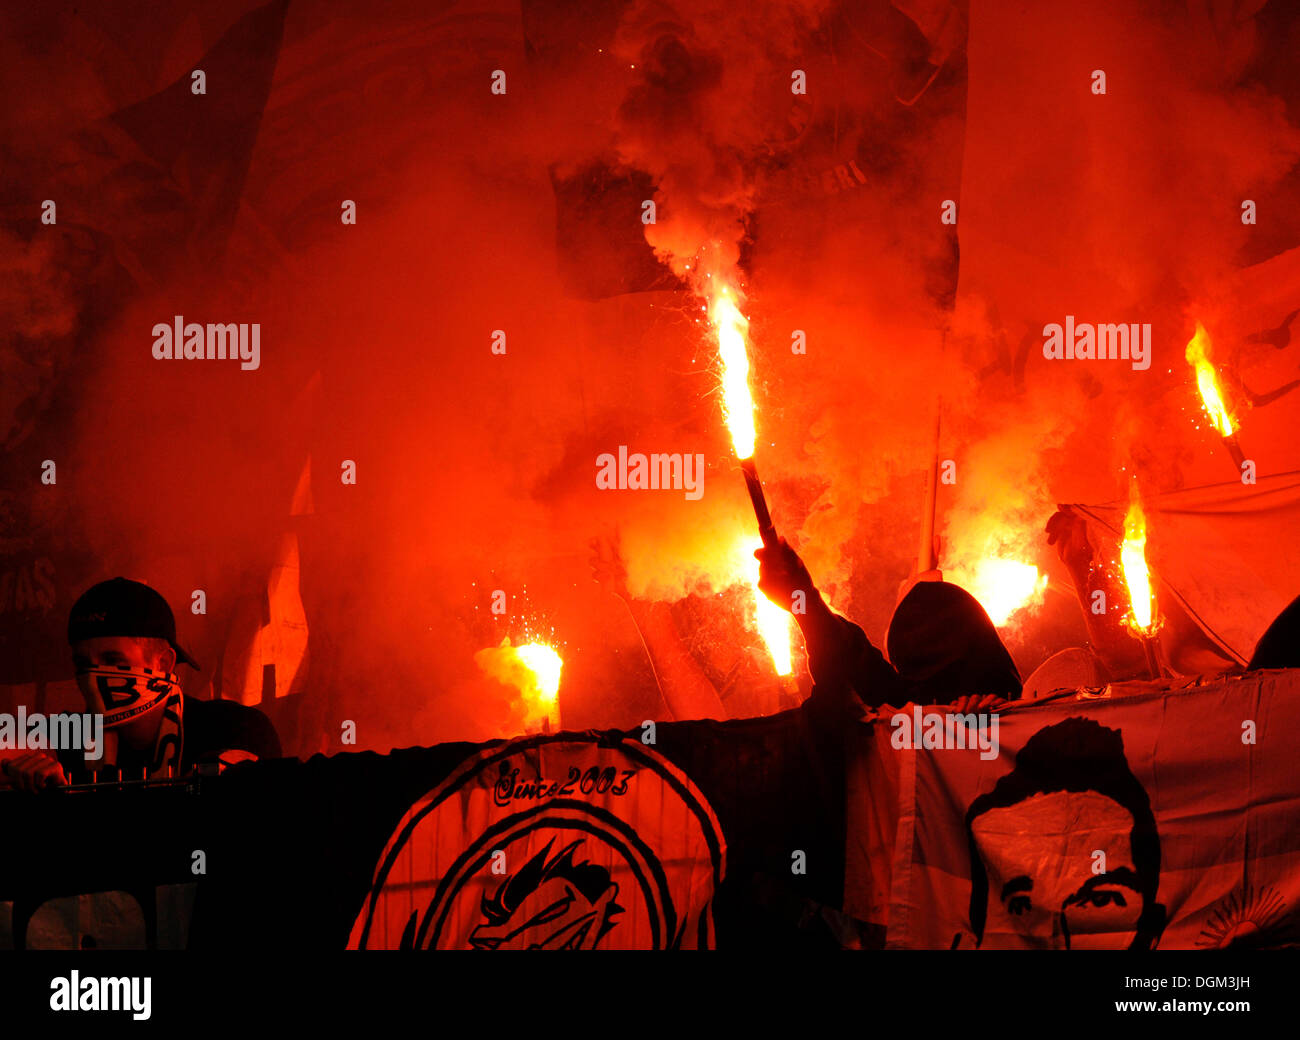 Violent, masked supporters igniting flares in a stadium fan block Stock Photo